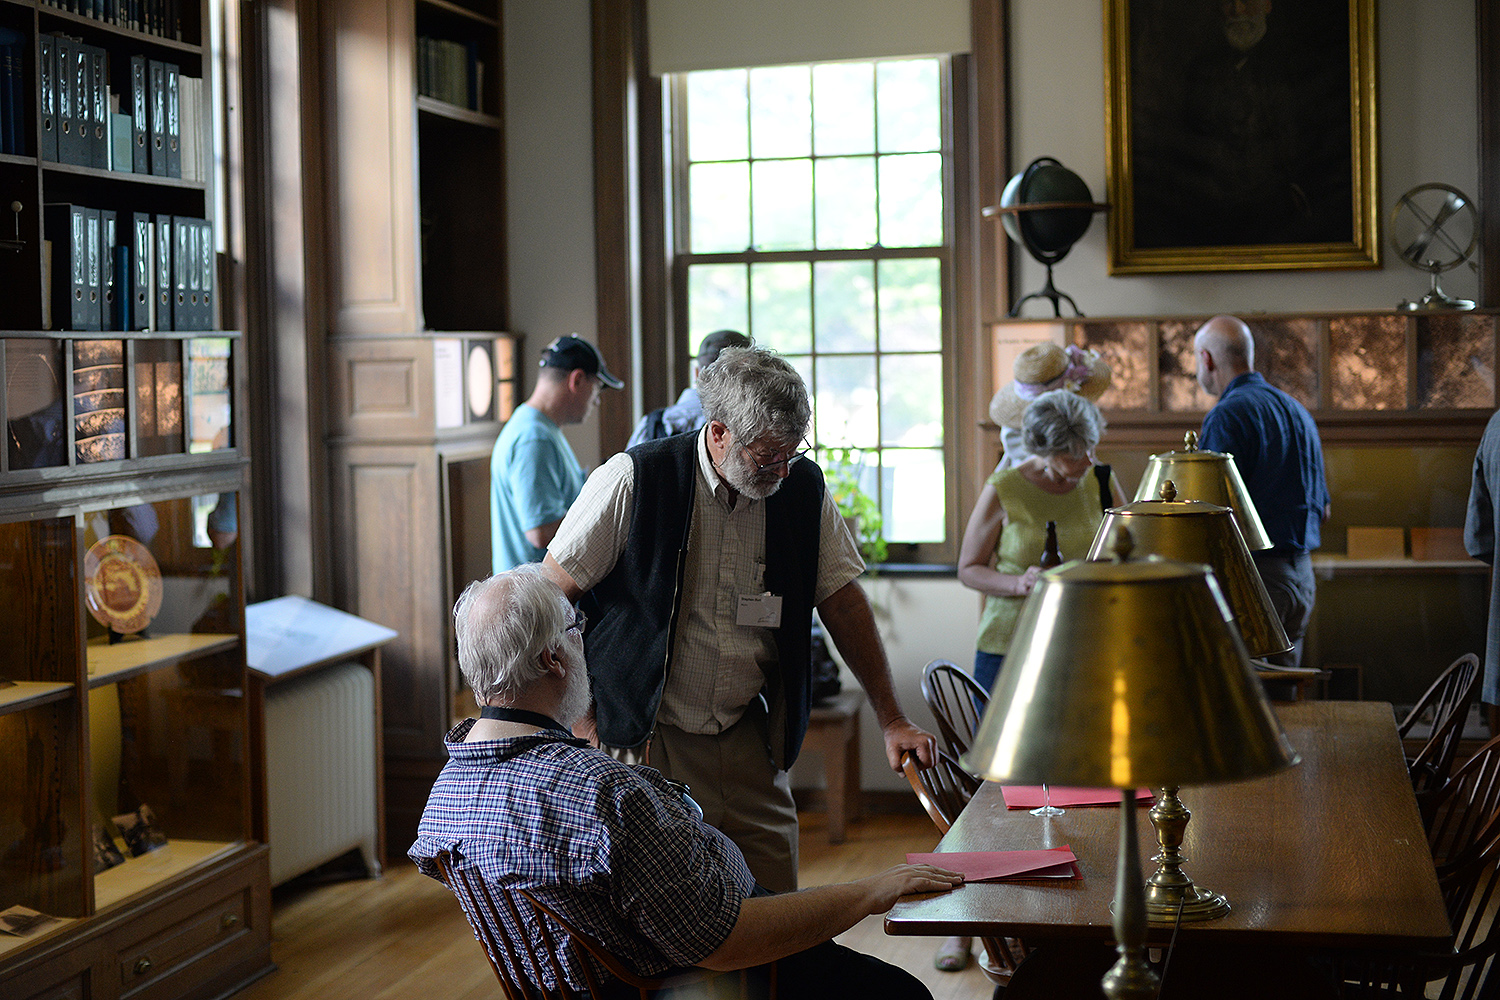 Guests visited the historical exhibit commemorating the observatory's centennial in the building's library.